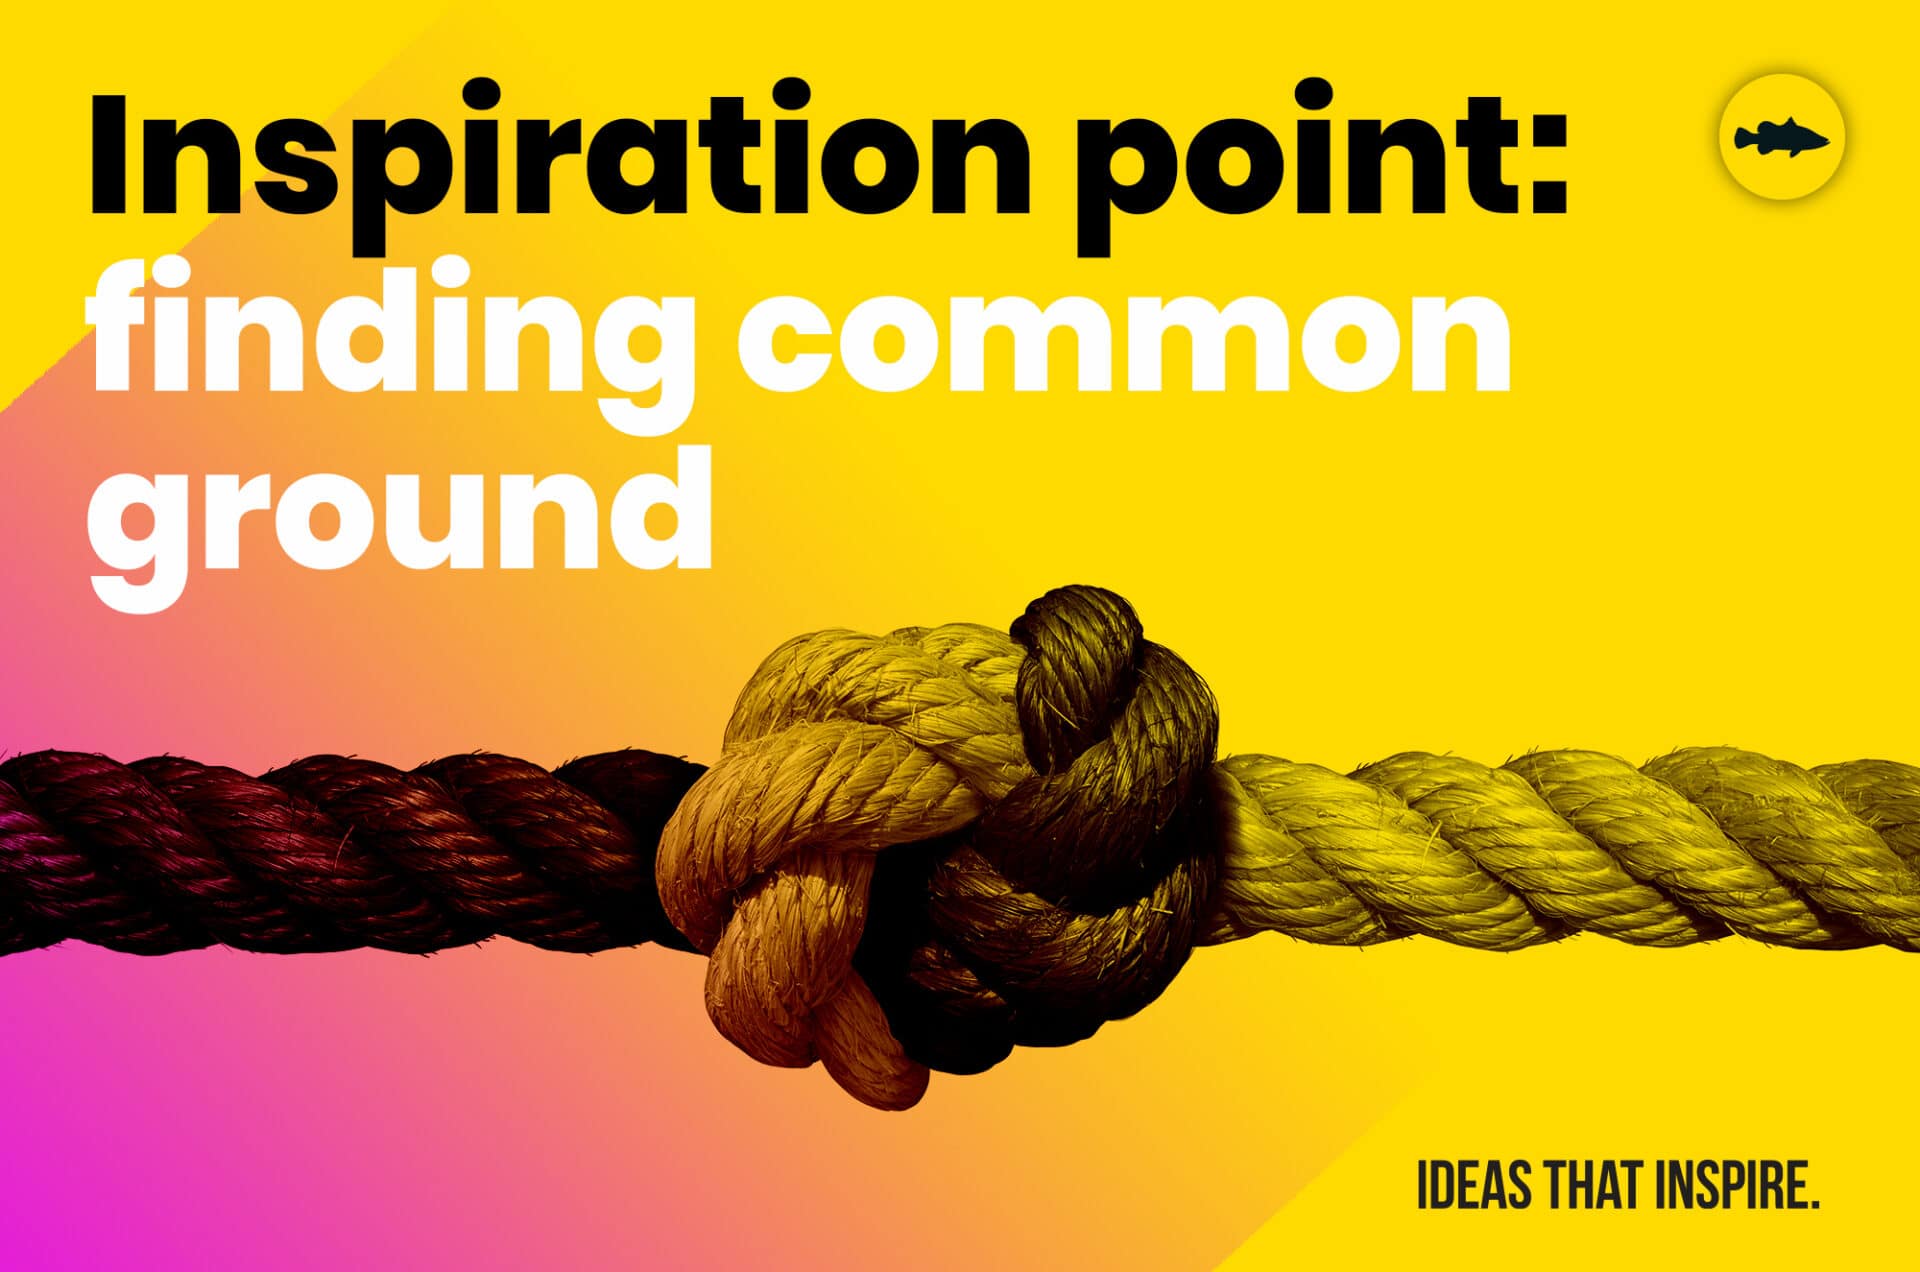 Inspiration point: finding common ground